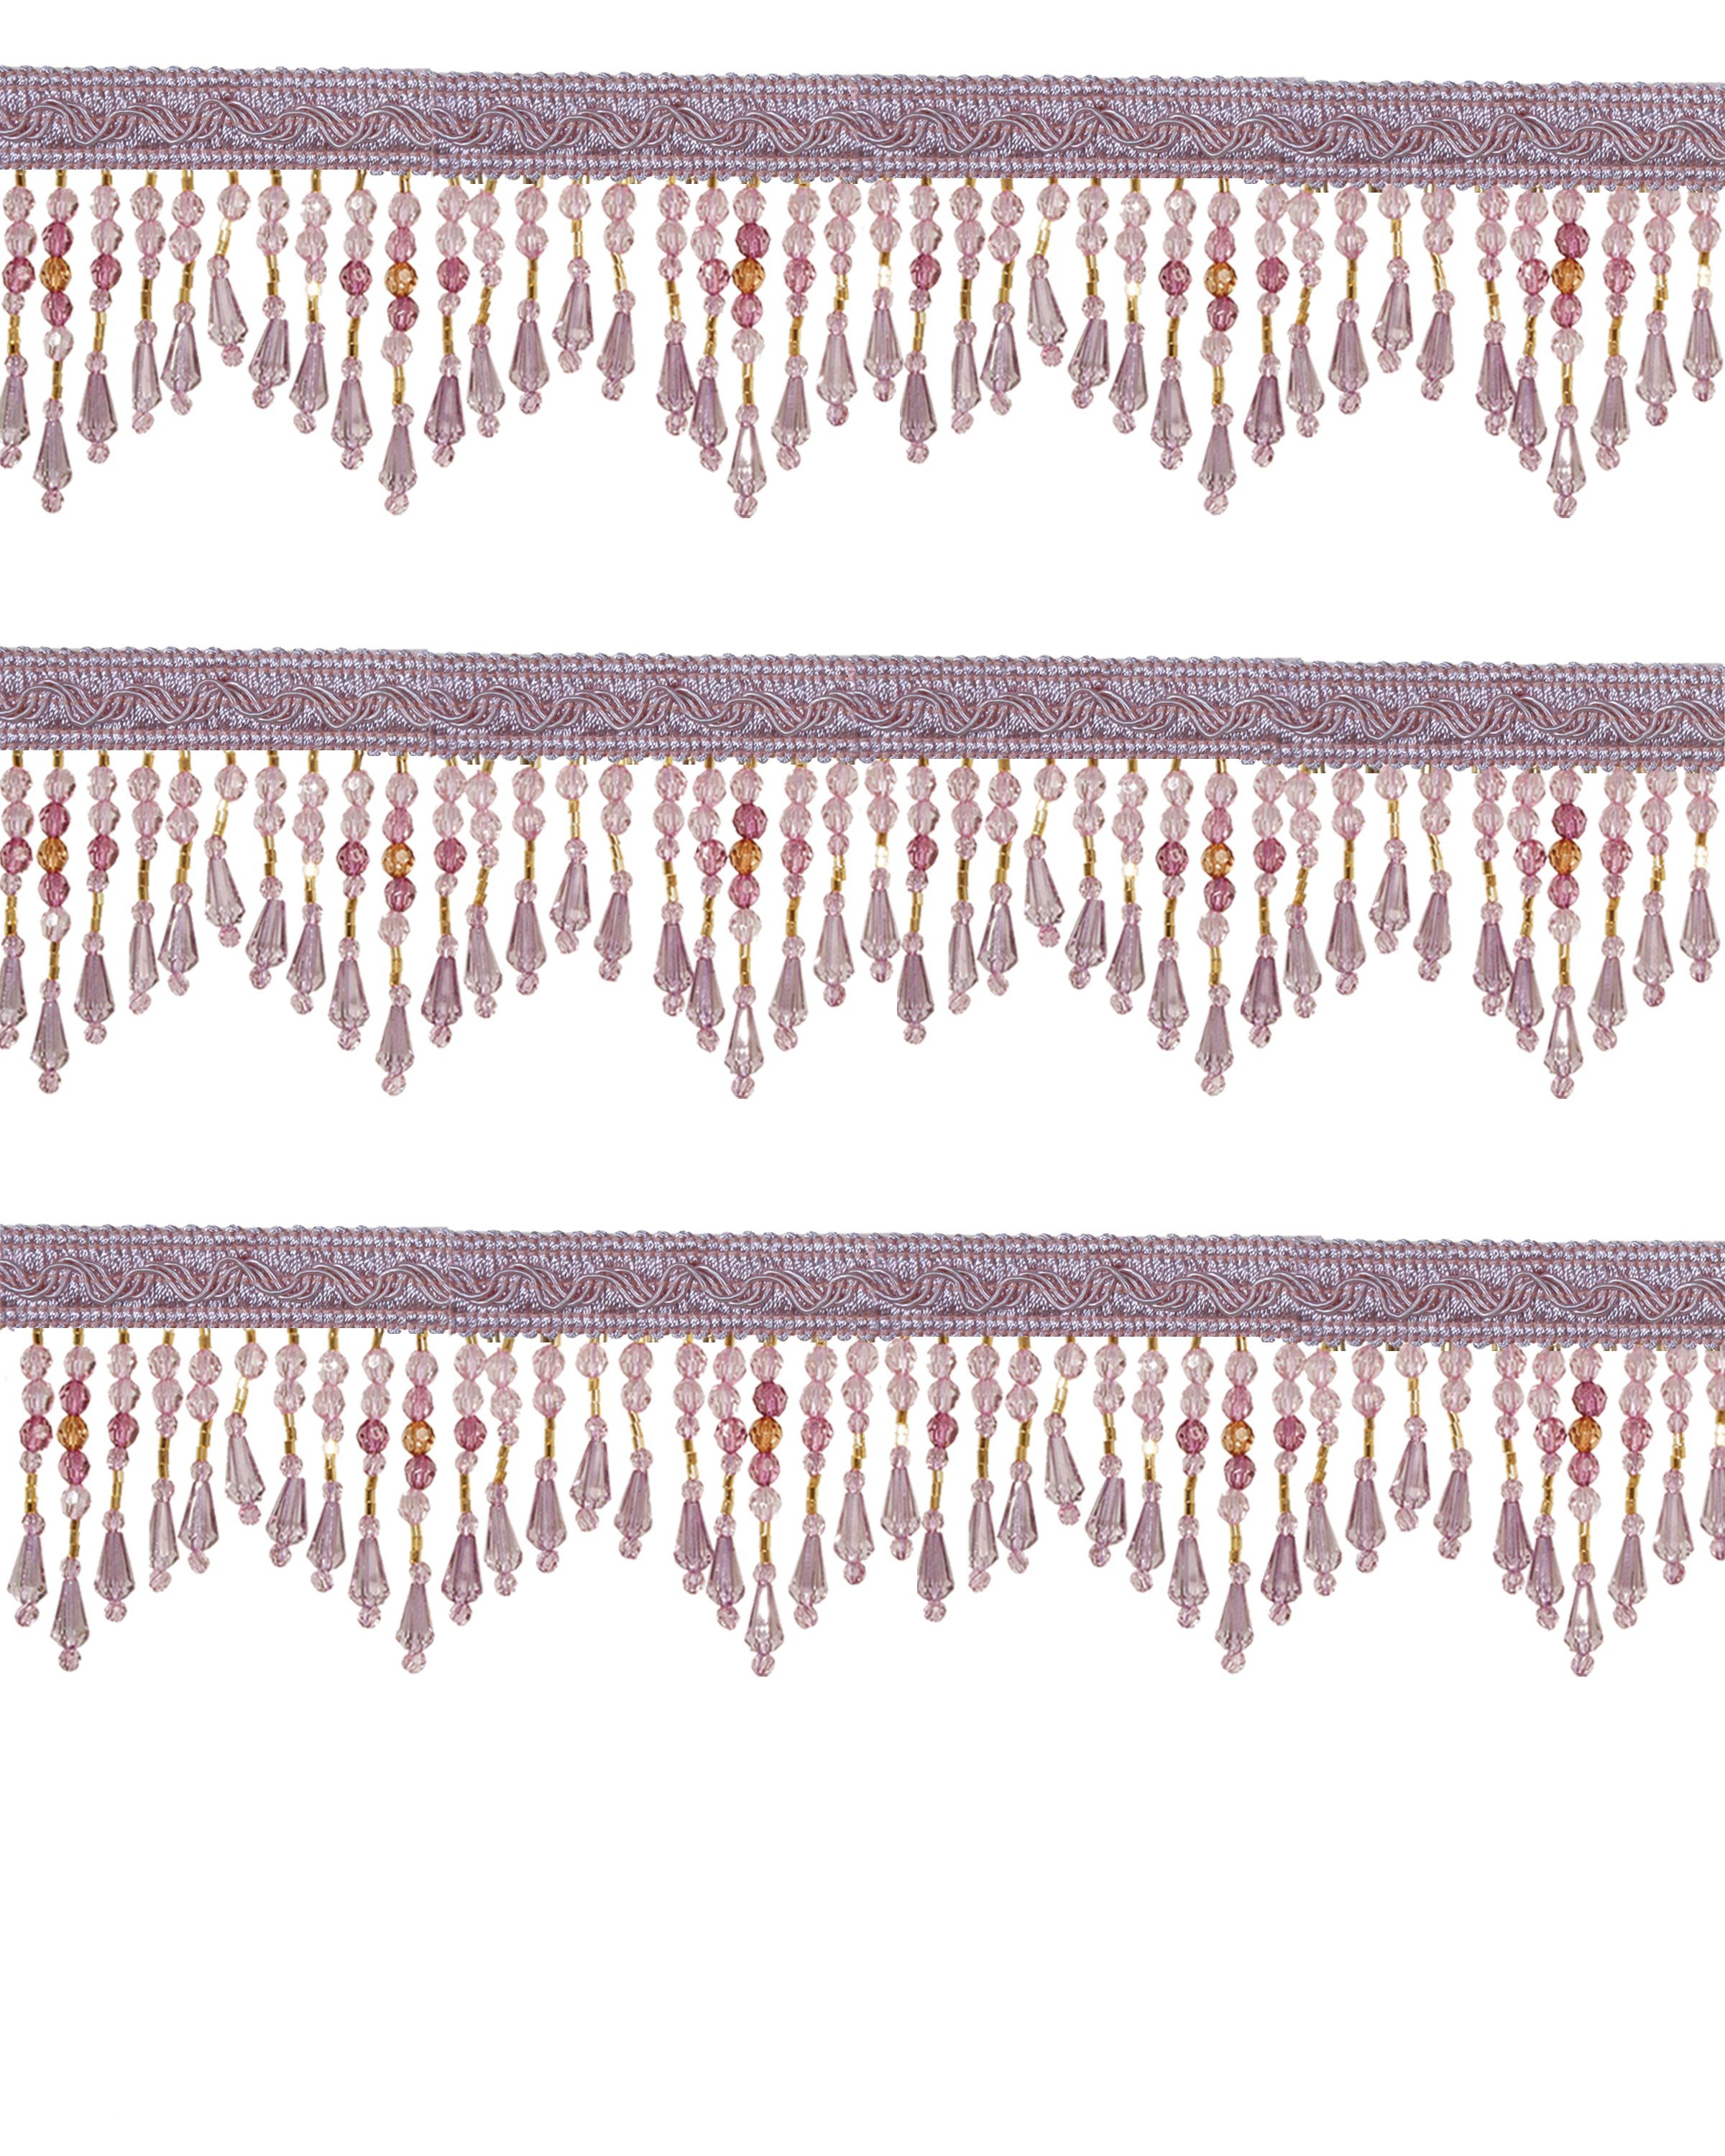 Fringe Beading with drops - Amethyst 70mm Price is for 5 metres